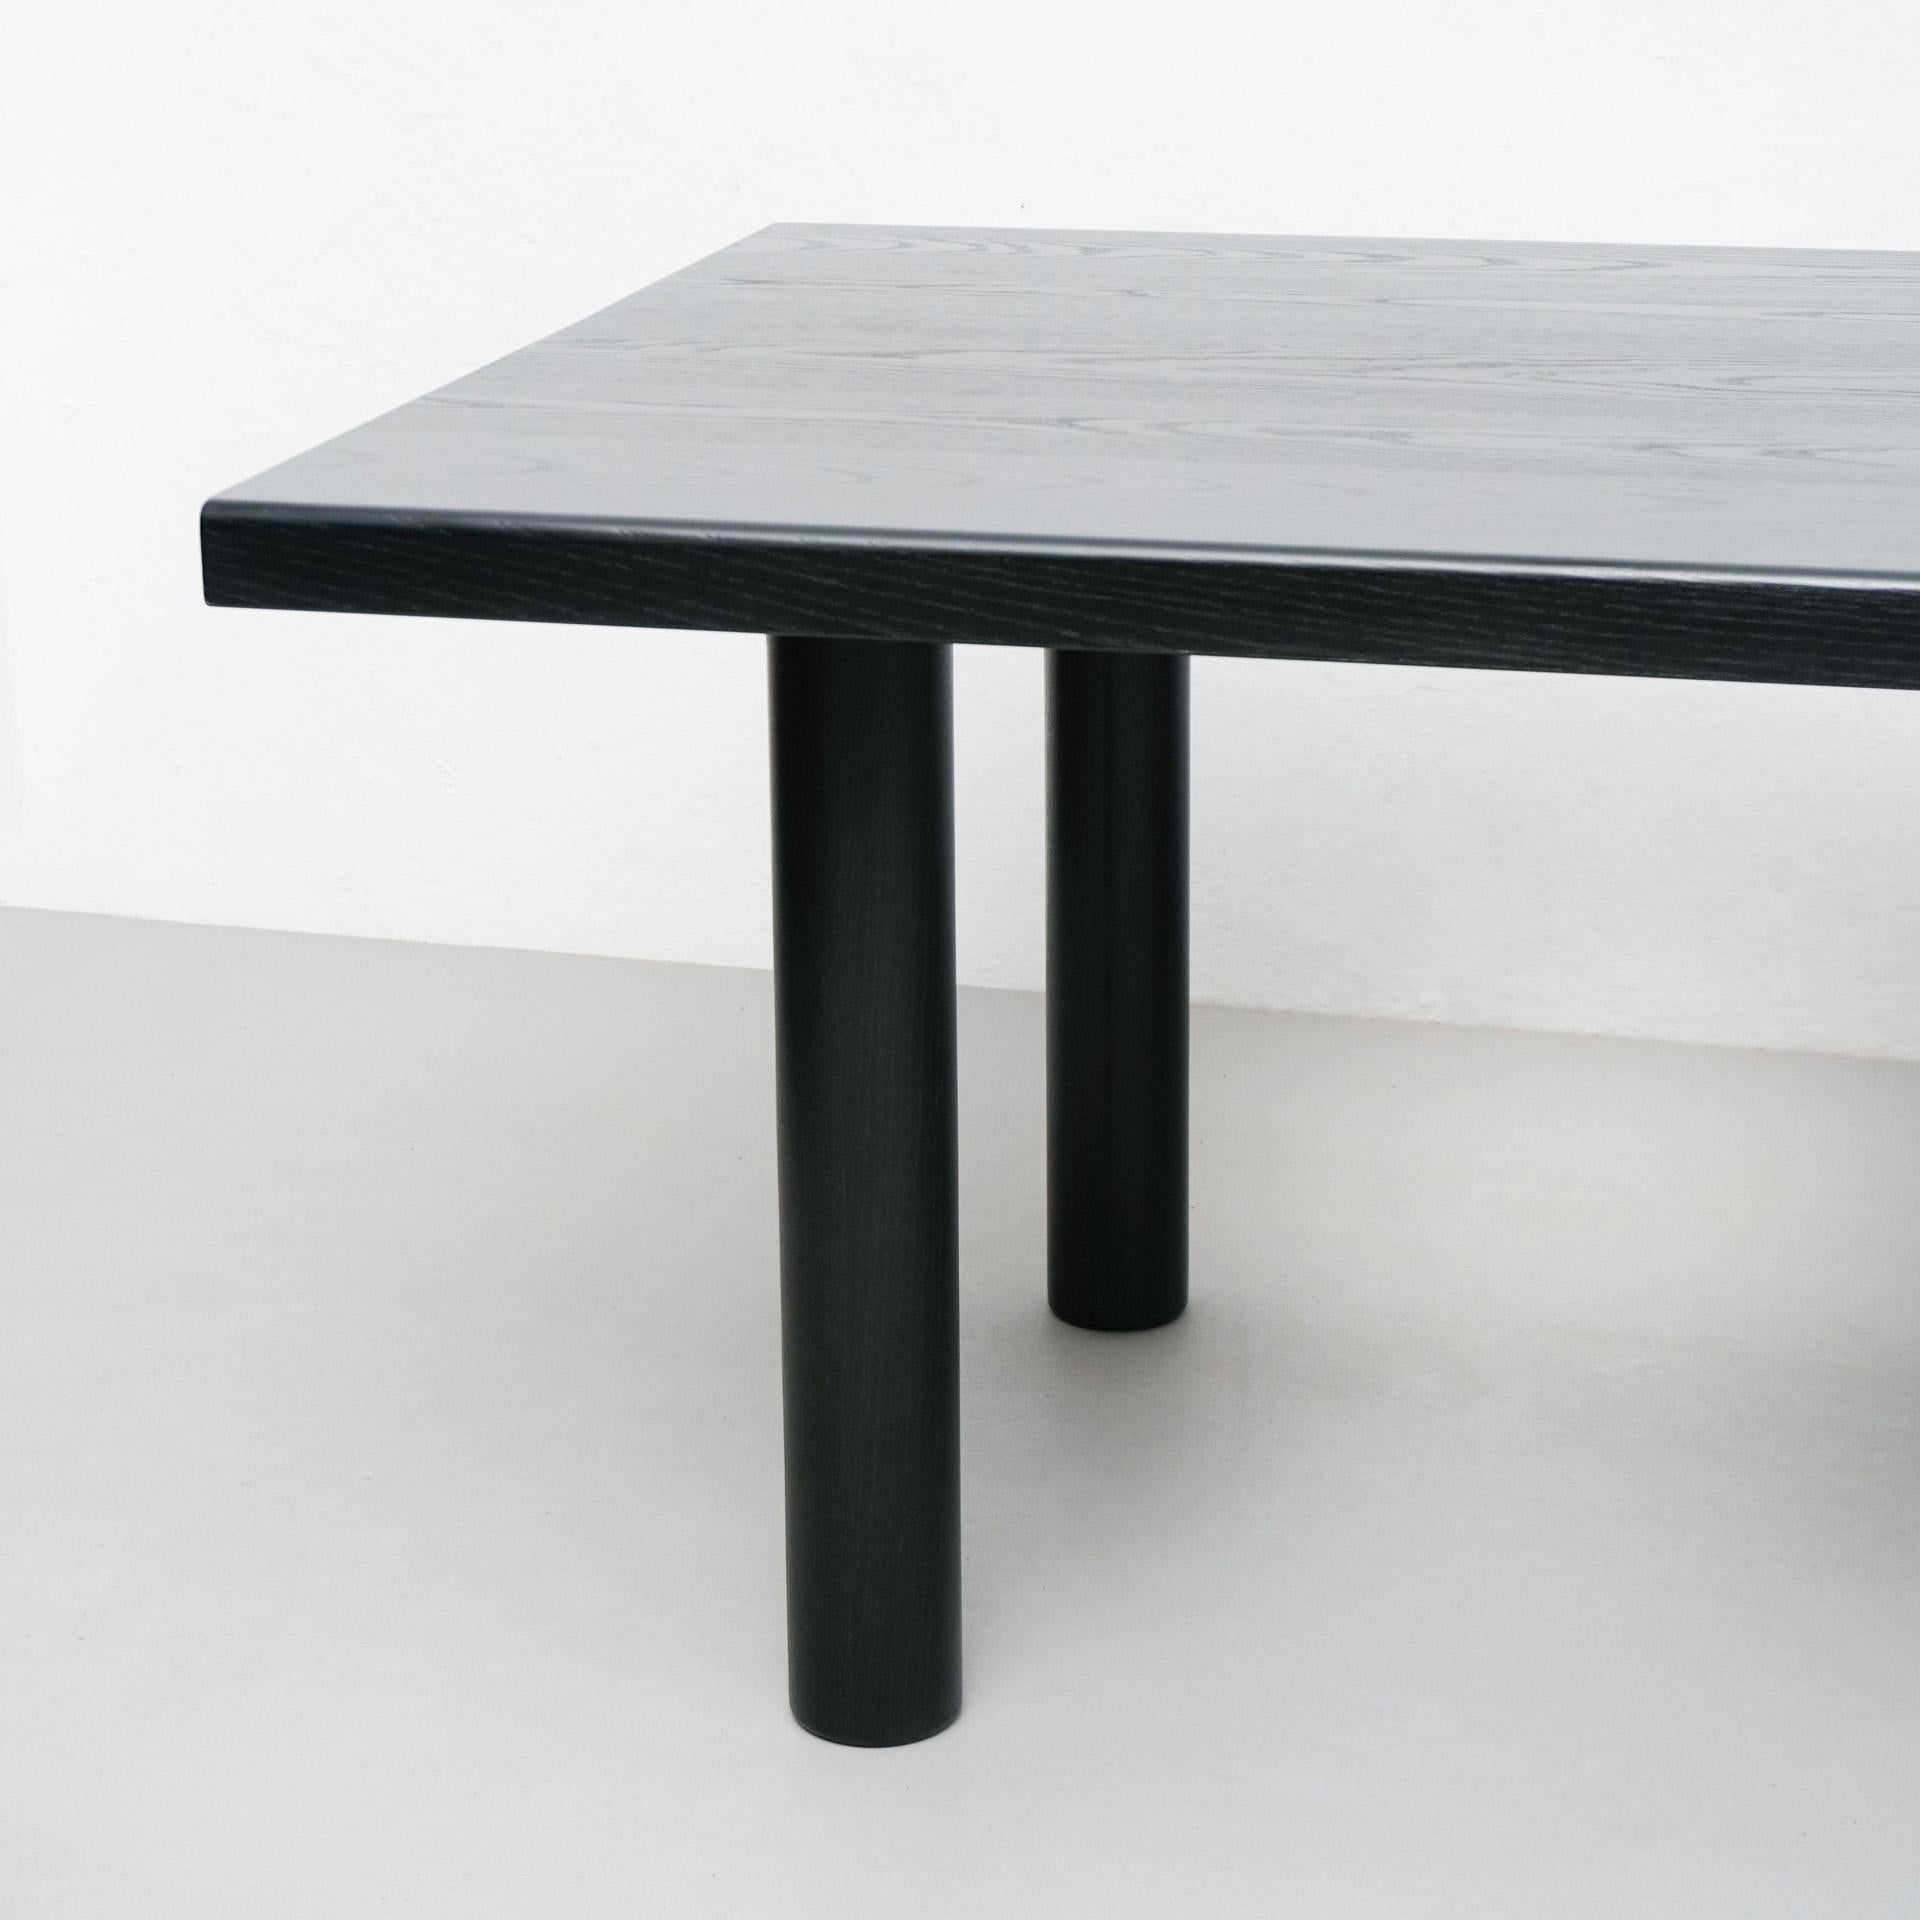 Dada Est. Contemporary Solid Ash Wood Black Lacquered Dining Table 4